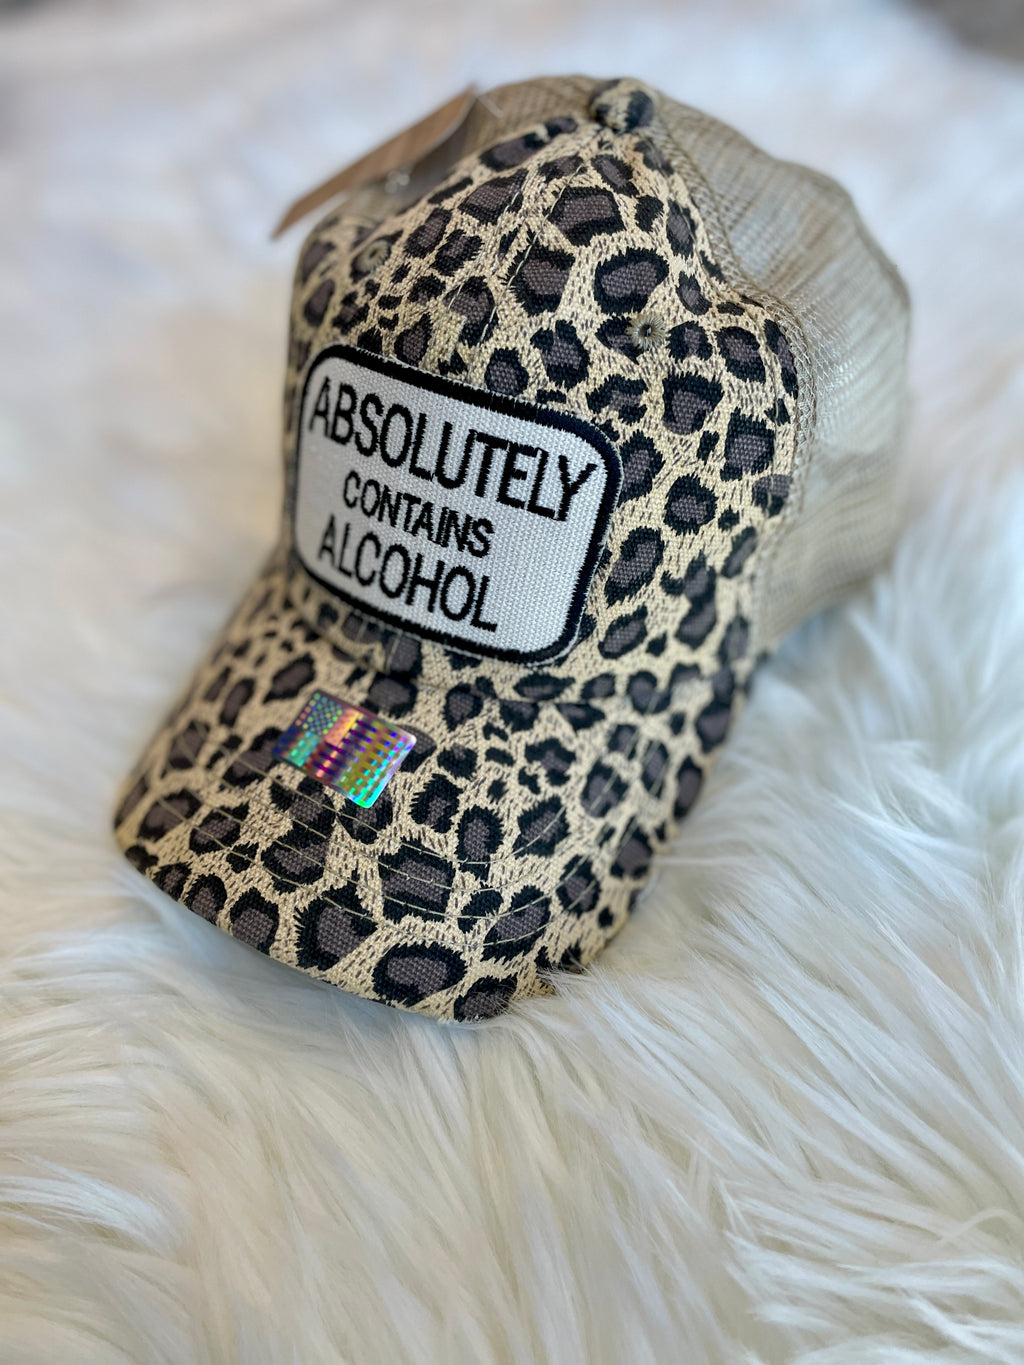 Absolutely Contains Alcohol Trucker Hat